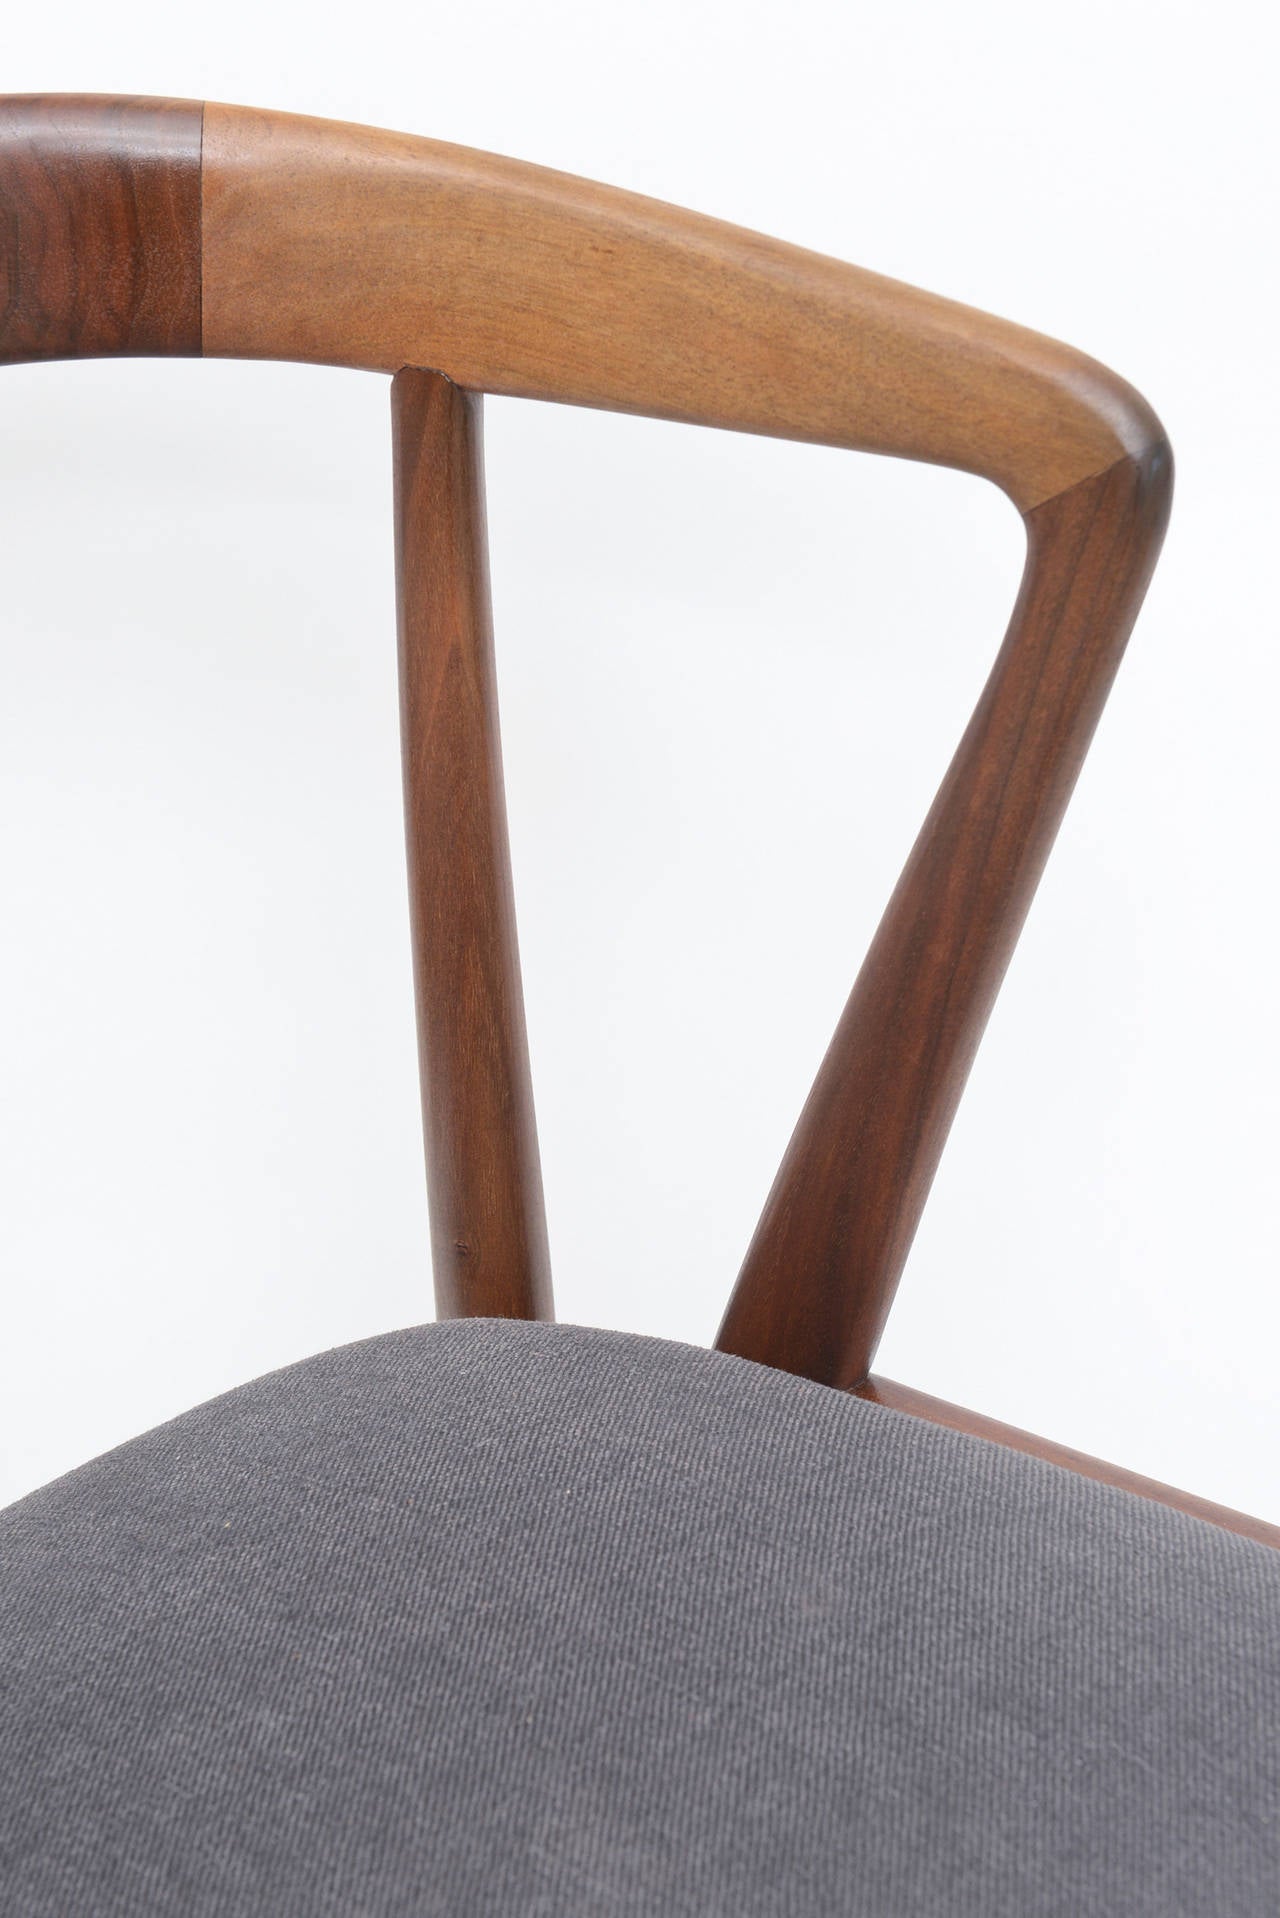 This sculptural matchbook walnut and mahogany side or desk chair is handsome.
This was in the style and influence of Gio Ponti done by Bertha Schaeffer
The new upholstery in gray fabric is very manly!
It has great form from all angles. The seat